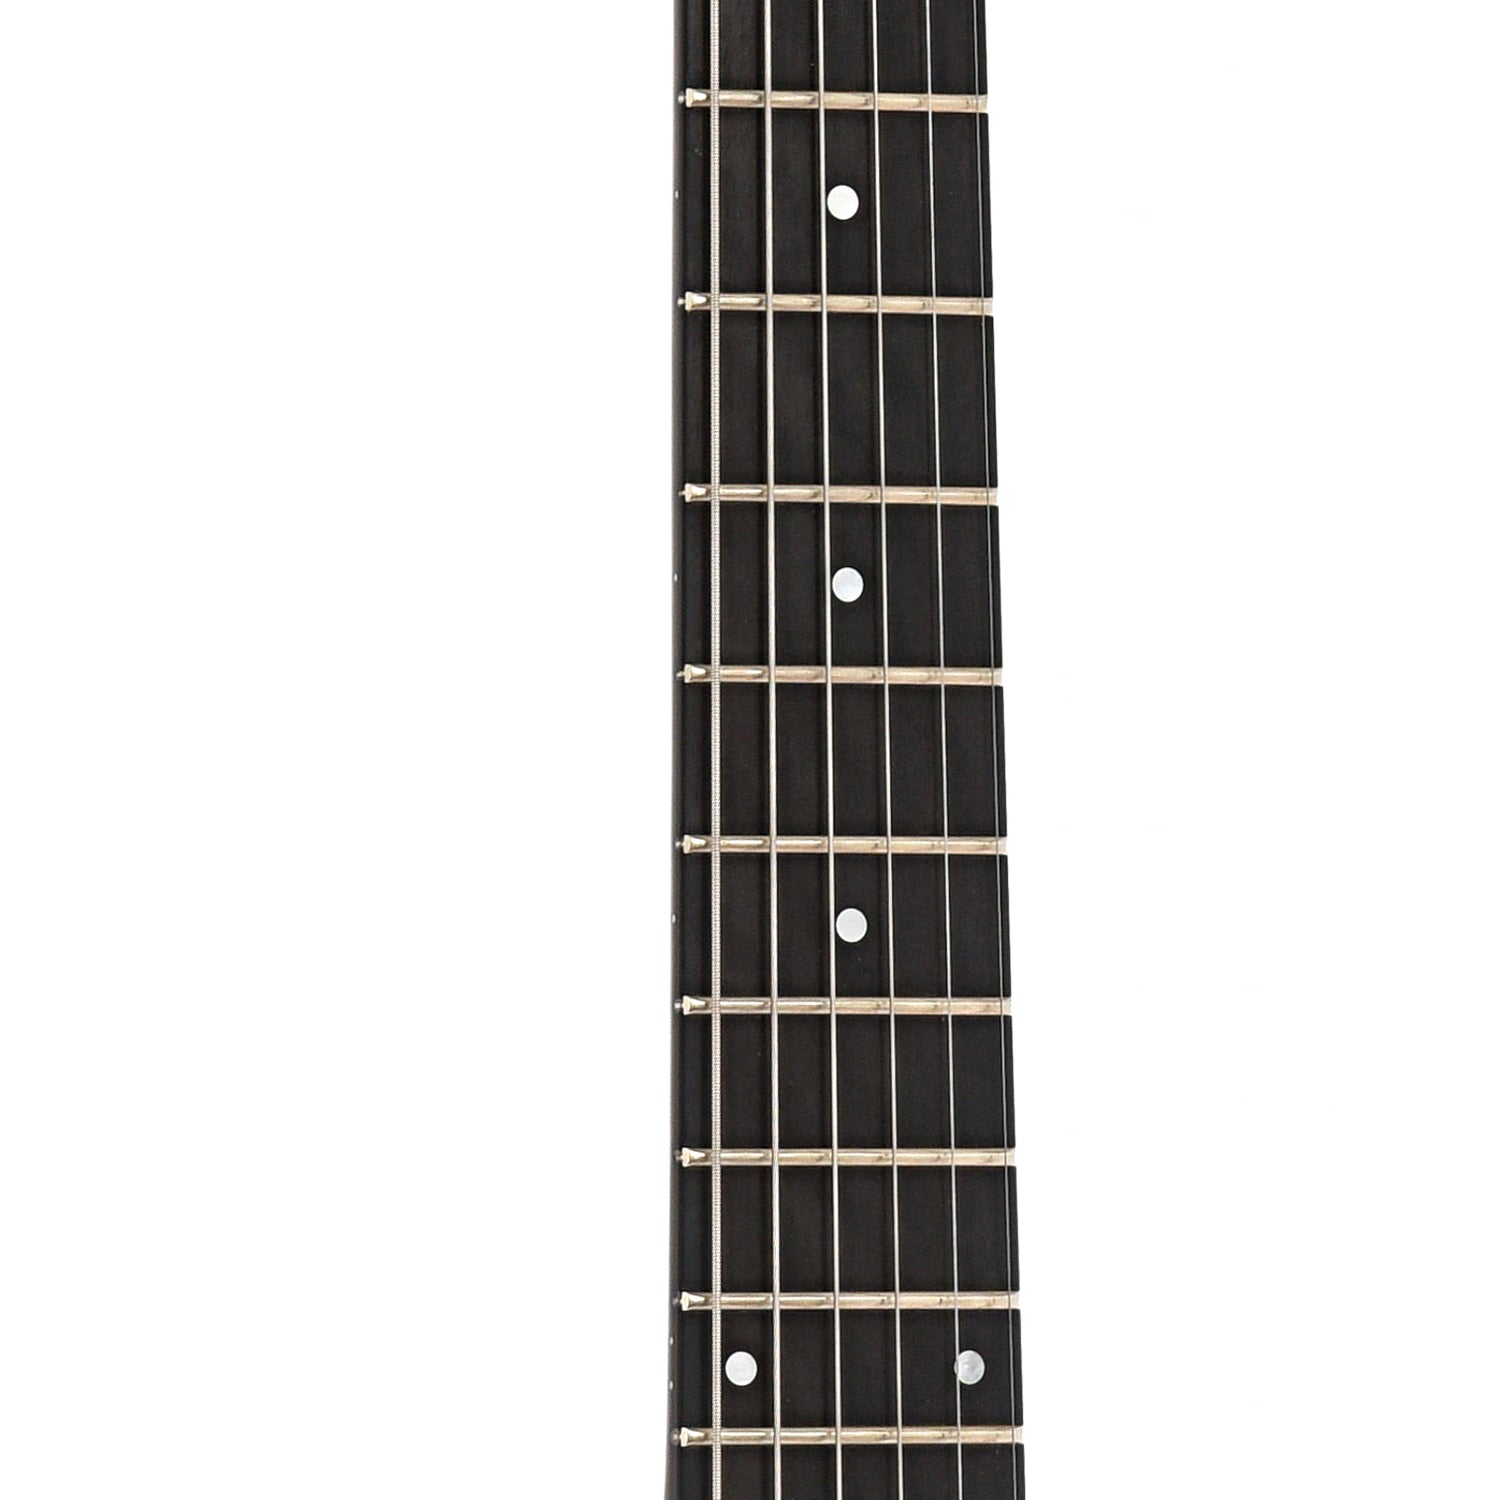 Fretboard of National Resolectric